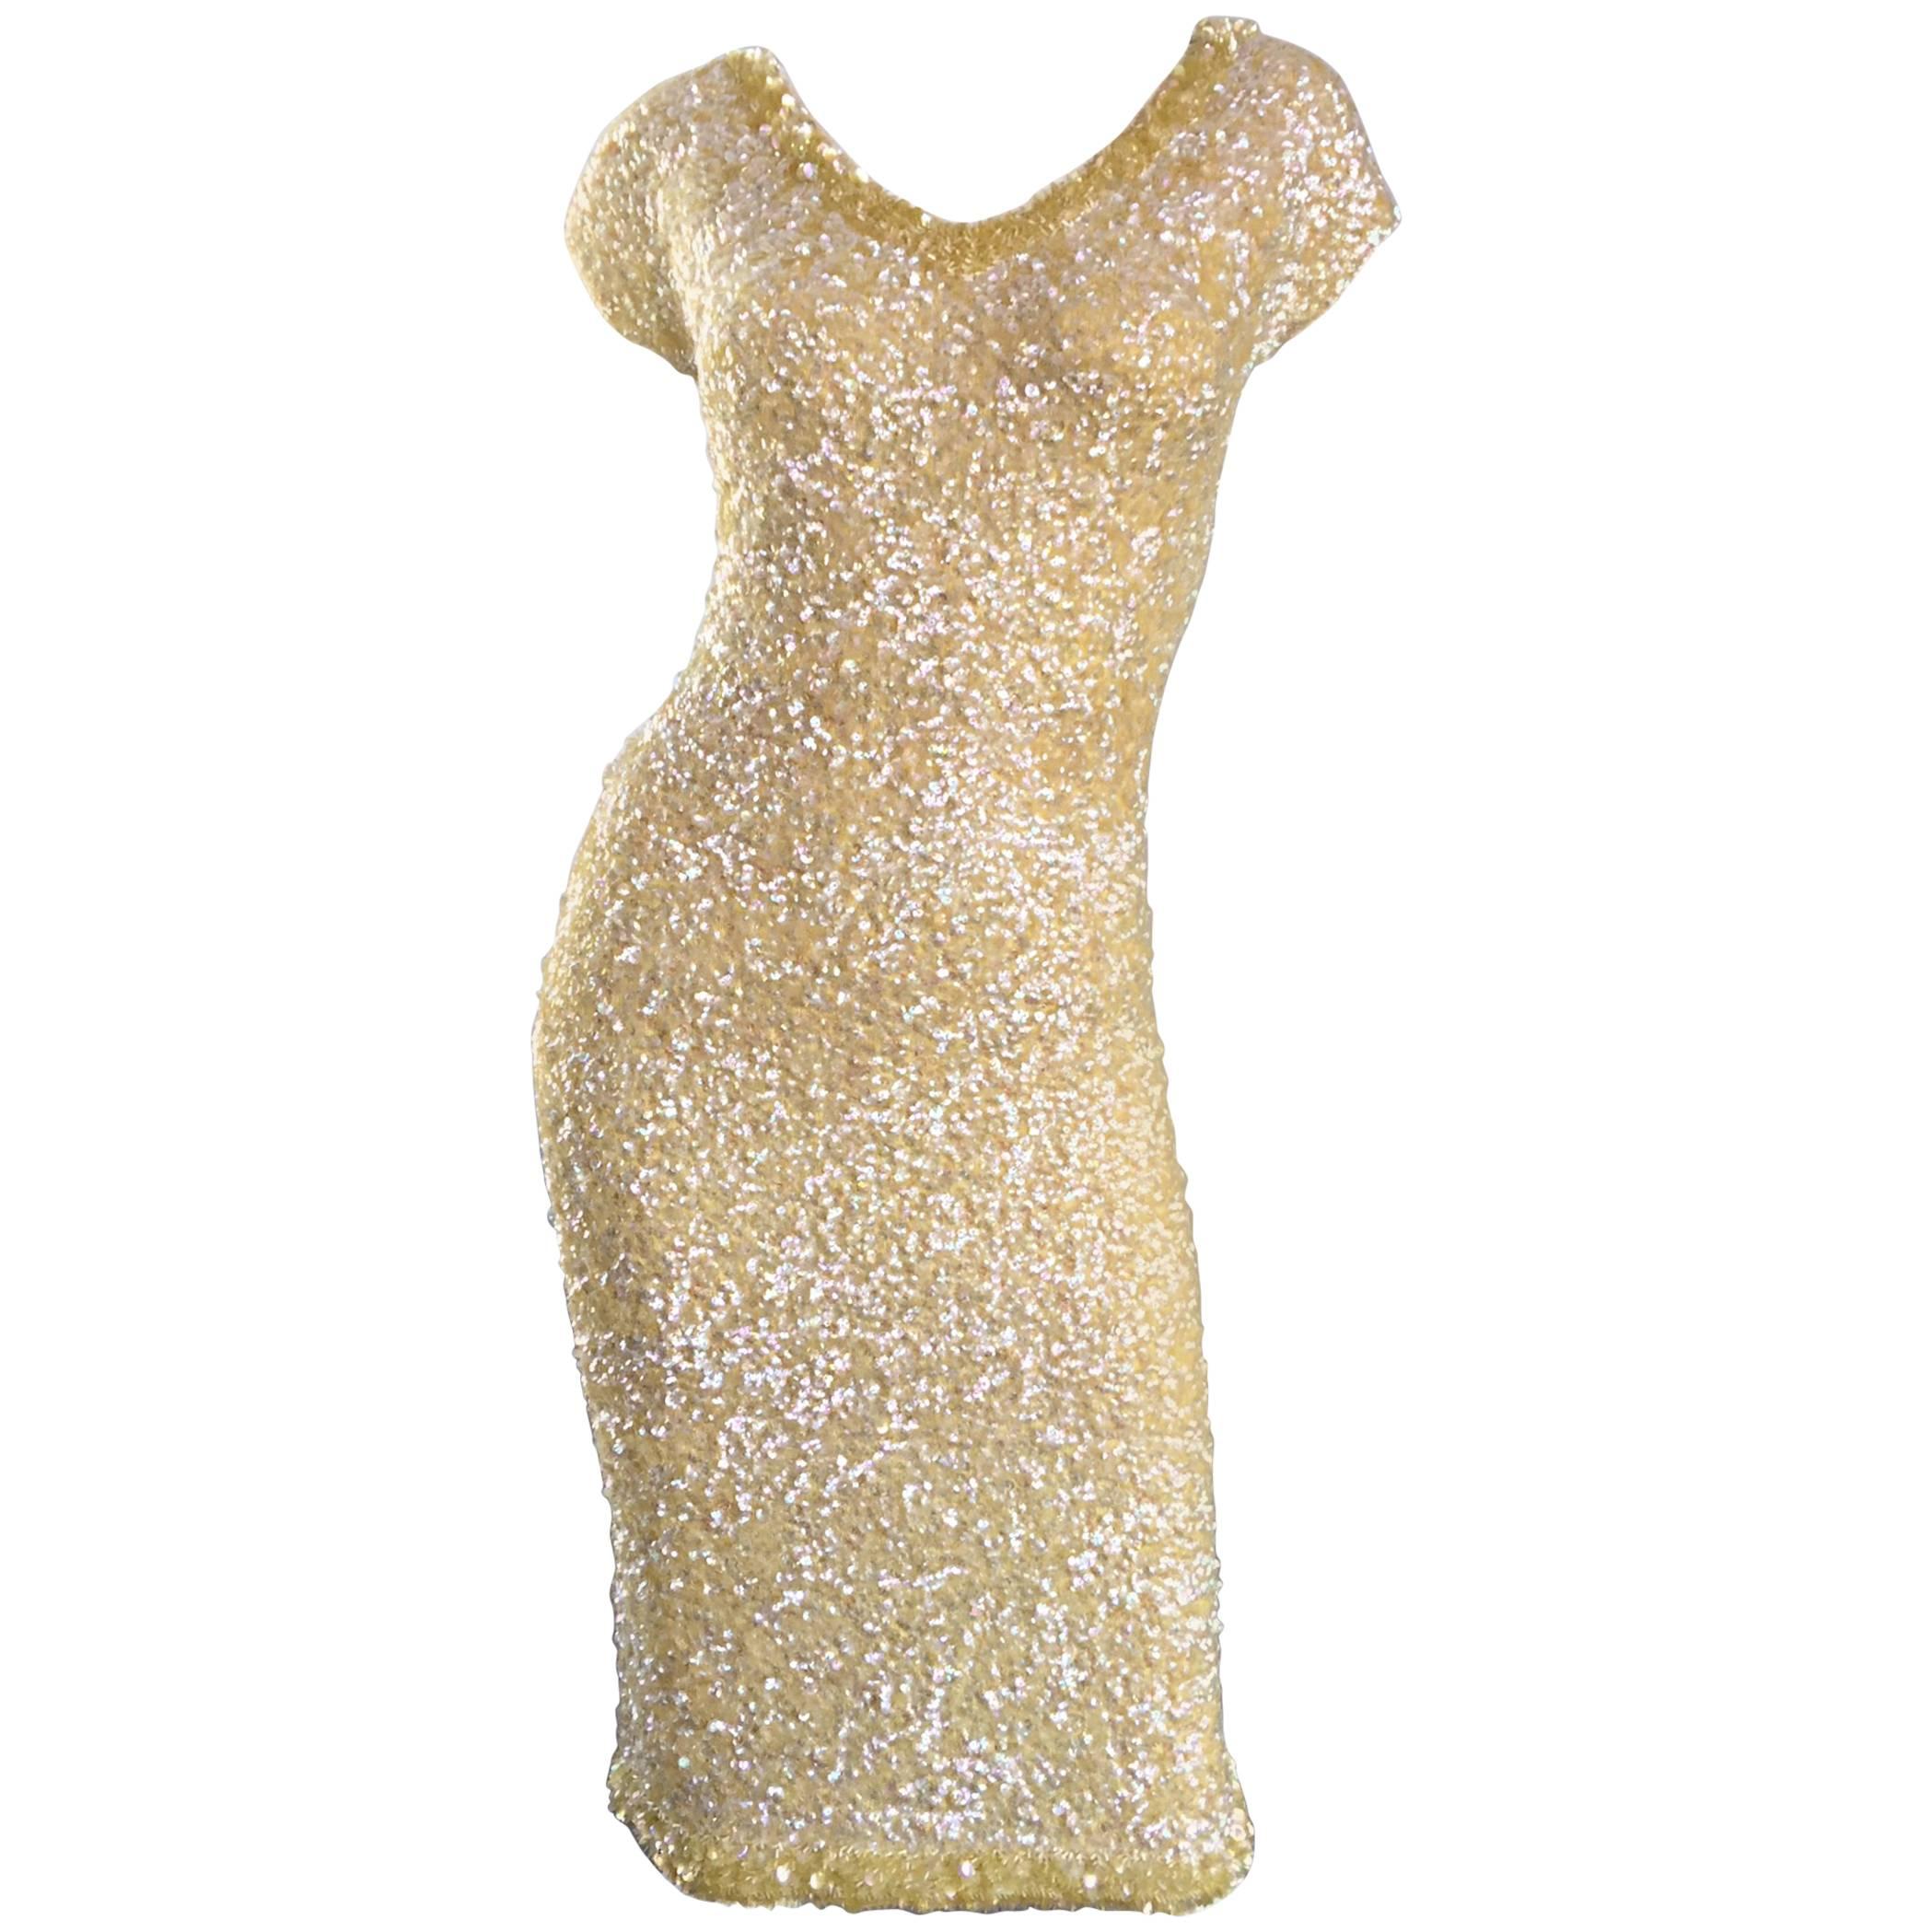 1950s Gene Shelly's Pale Yellow Fully Sequined 50s Vintage Wool Wiggle Dress